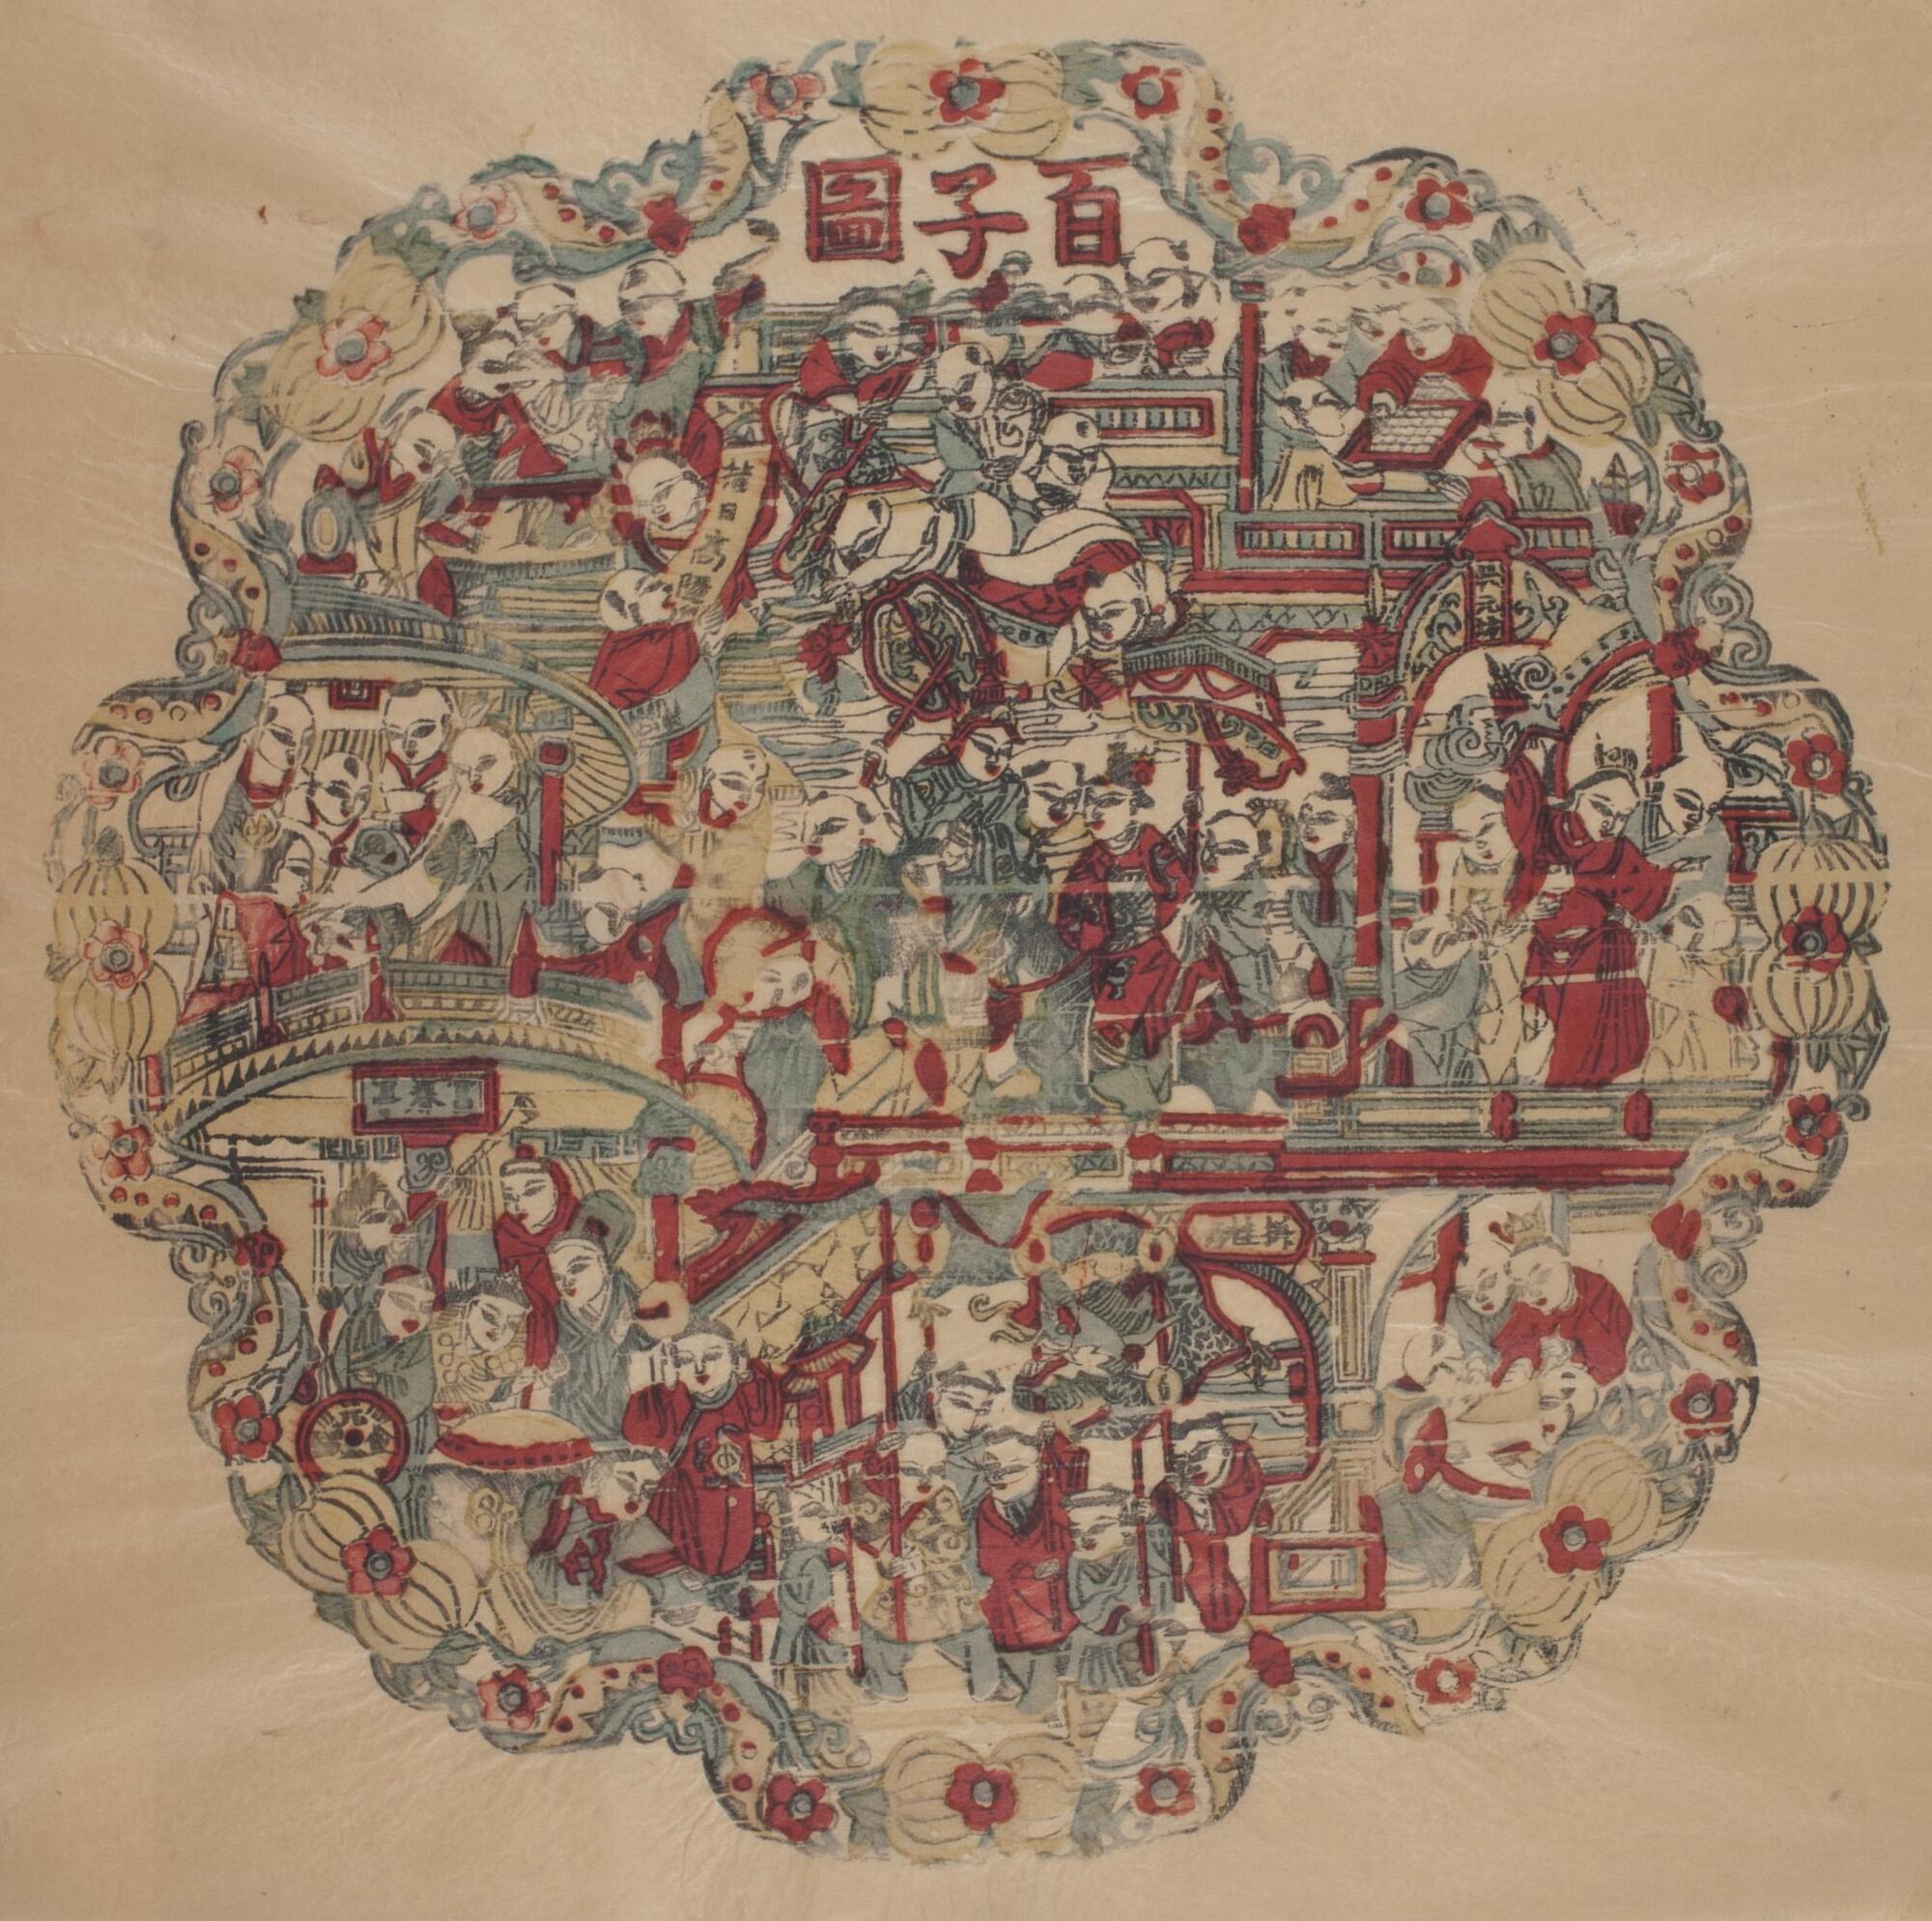 This is a woodblock print on paper of a collage of children enjoying various activites. The print is red, blue-gray, and pale yellow and has a floral border. The overall shape of the print resembles a circle but edges of the border cave in and out. The print shows groups of children engaged in various activies who are separated by pillars and floor levels. The print is divided into three levels: top, middle, and bottom. In the top level, a group of children are riding a carriage, and another group of children are playing a board game. In the middle level, it shows children reading from a scroll. In the bottom level, it shows a group of children playing musical instruments, playing games, and writing or painting.&nbsp;